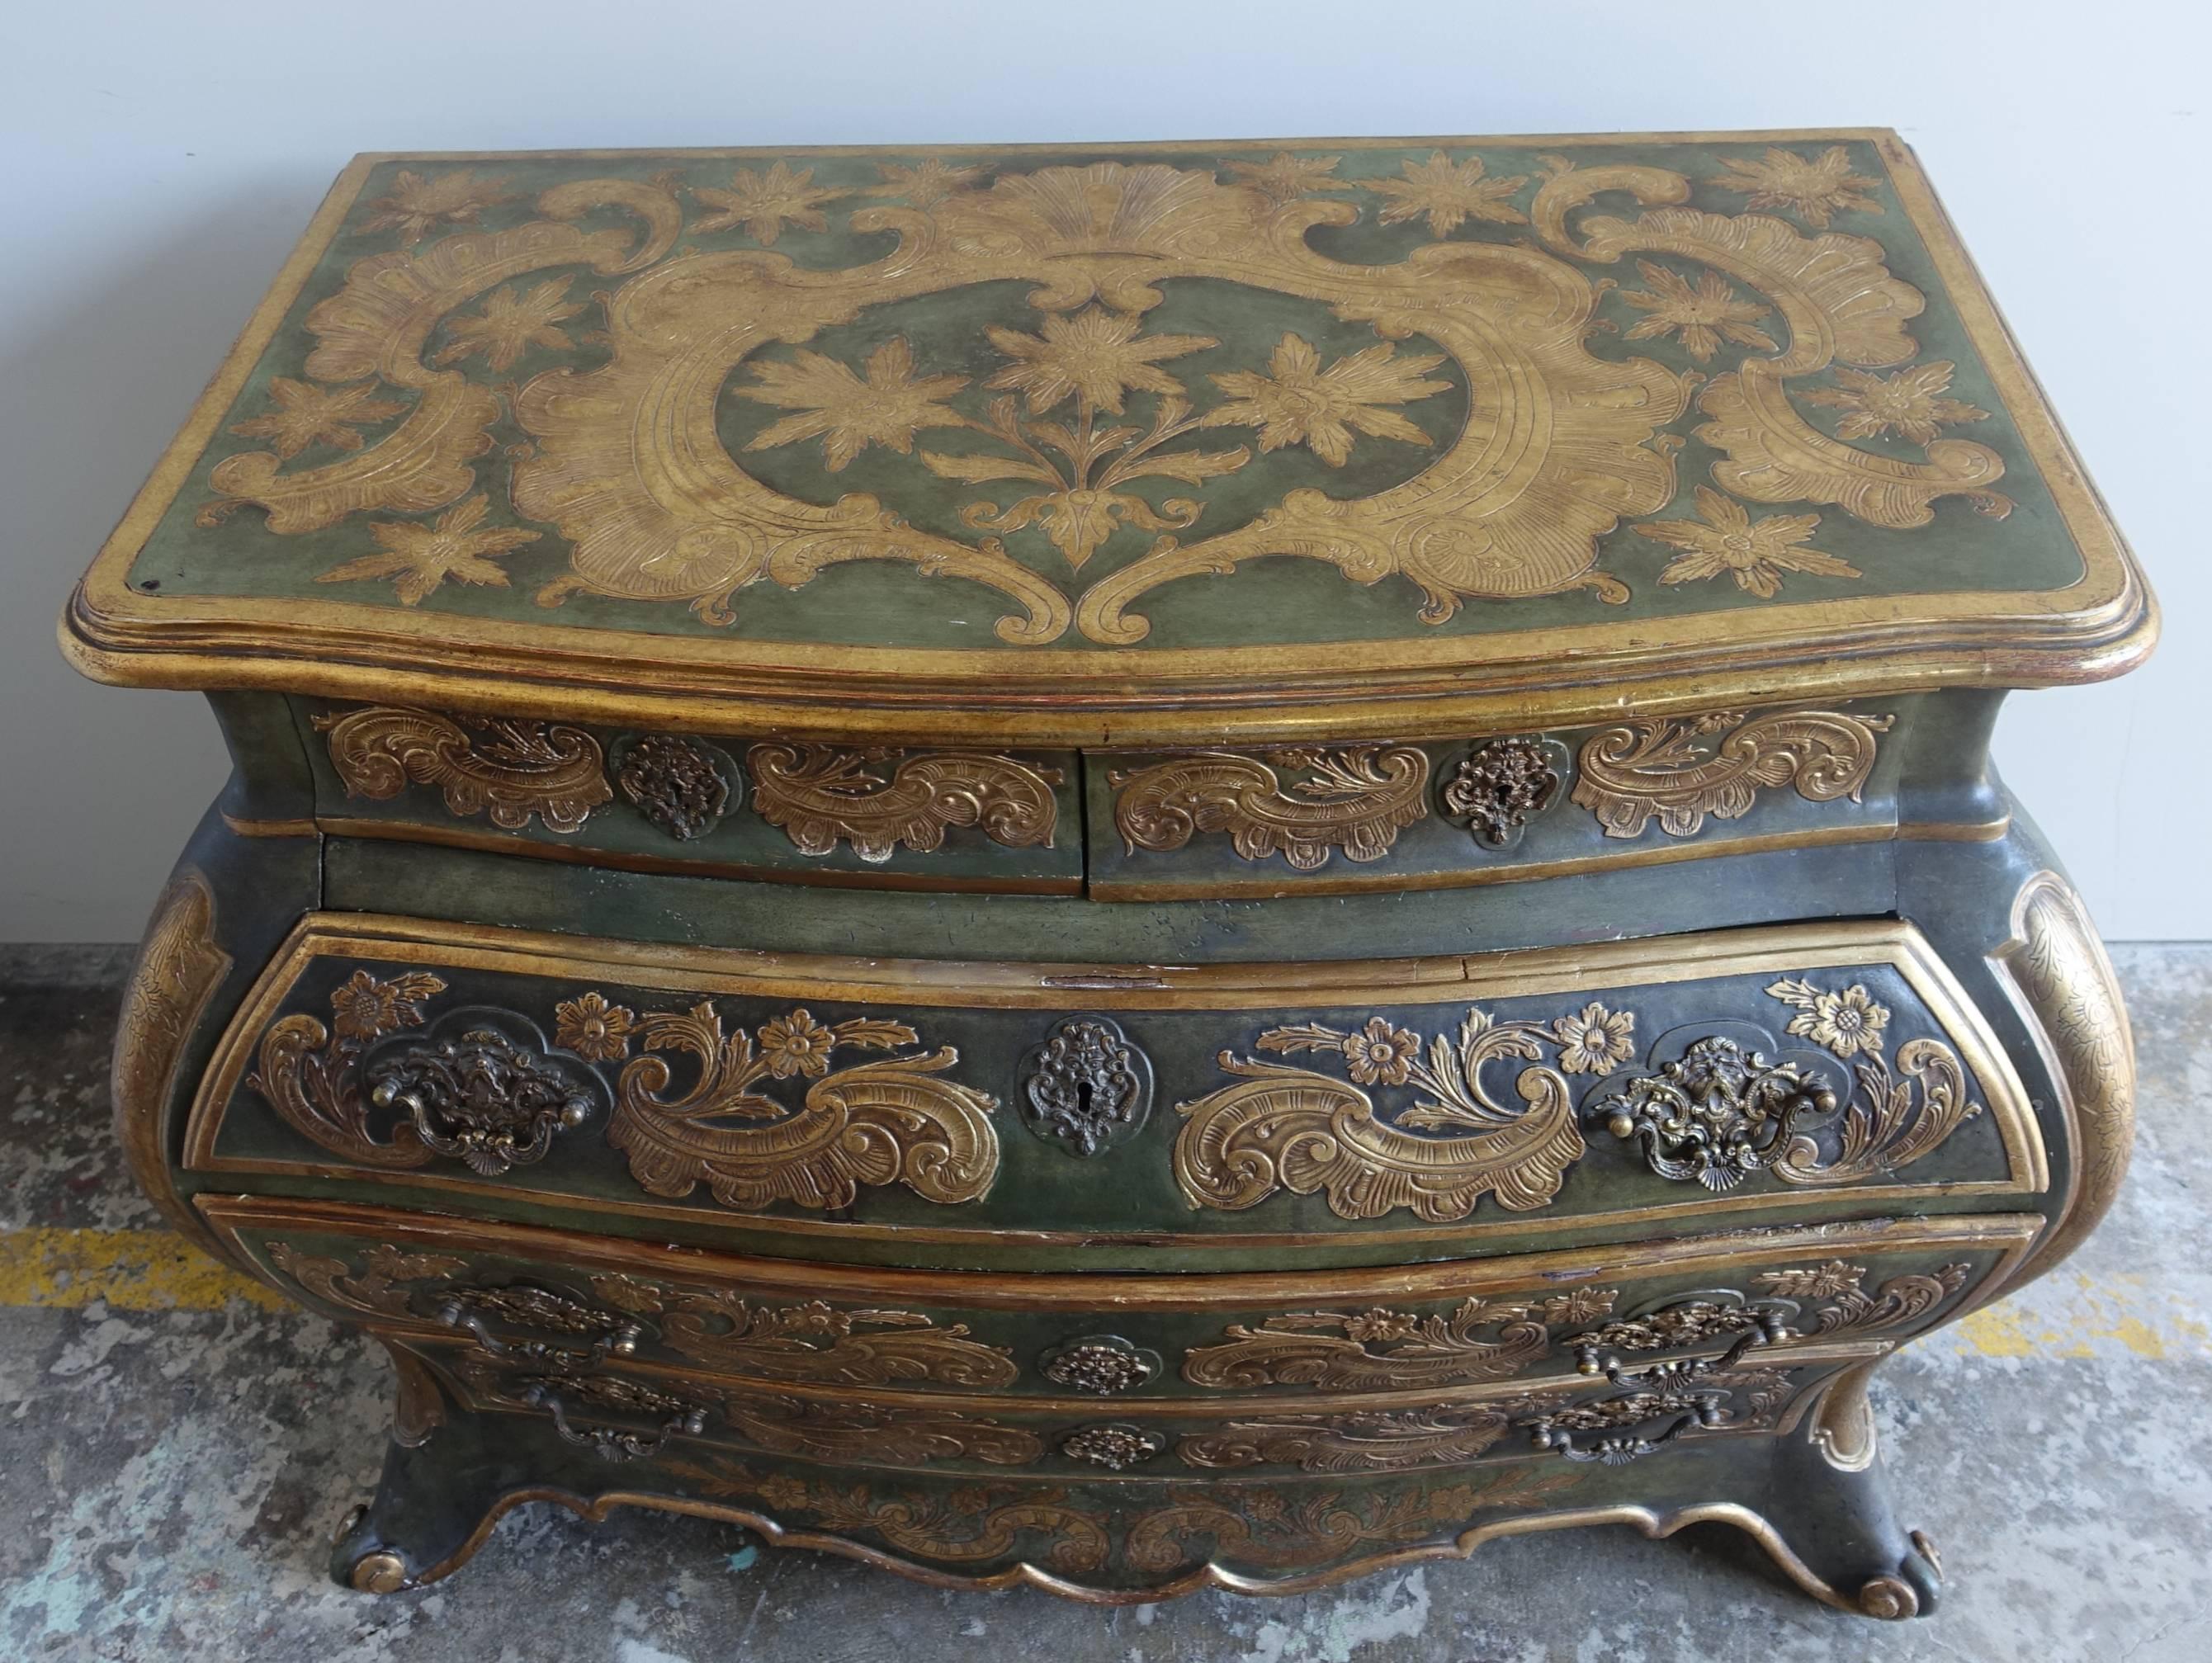 Italian wood painted gold gilt Bombay commode decorated with acanthus leaves and flowers throughout. The commode has five drawers standing on four legs with rams head feet. Beautiful original brass hardware.